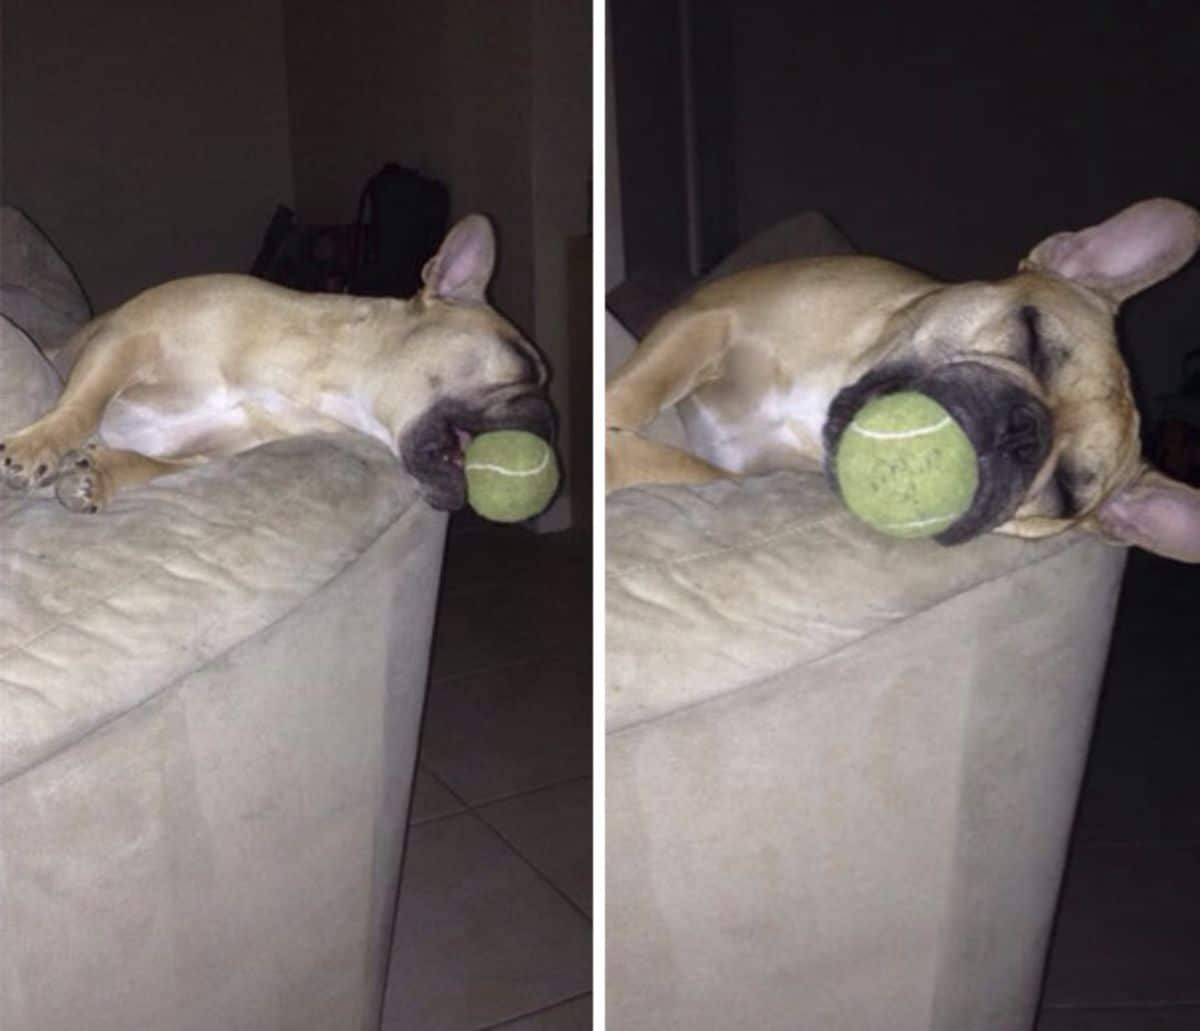 brown and white french bulldog laying sideways on a brown sofa sleeping with a yellow tennis ball inside the mouth